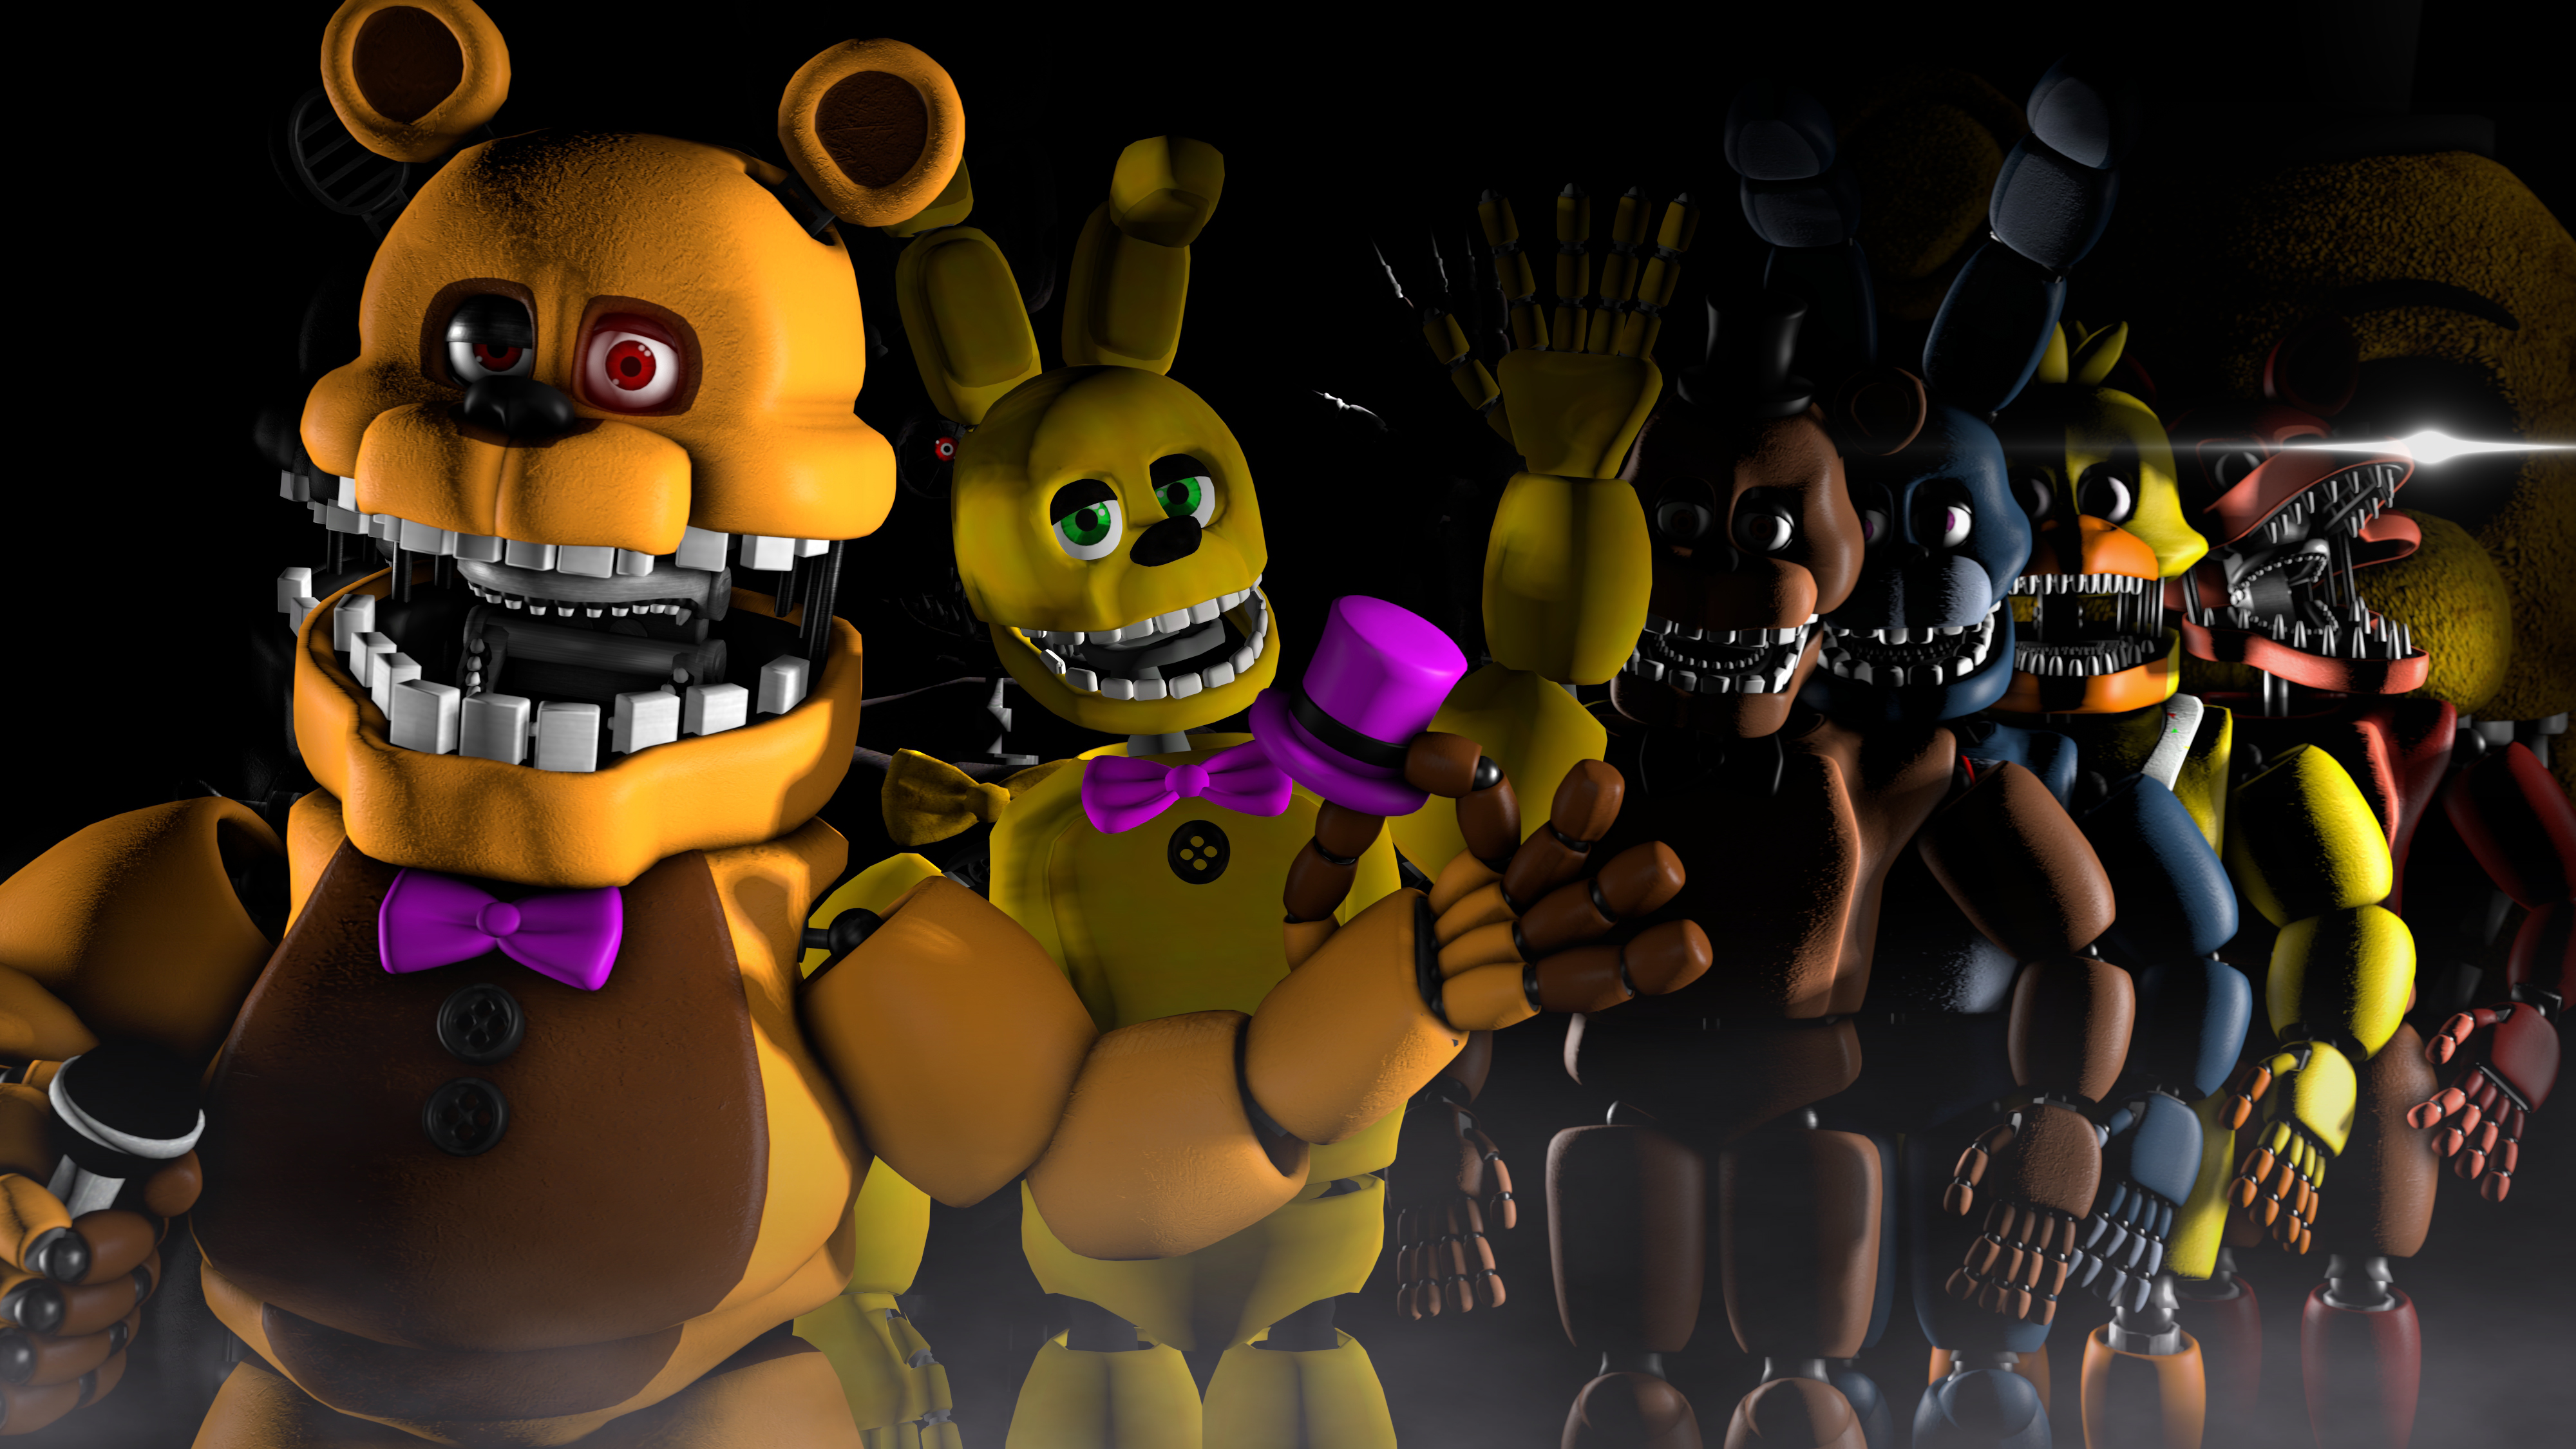 The joy of creation posters remake (Bonnie) by Bugmaser on DeviantArt